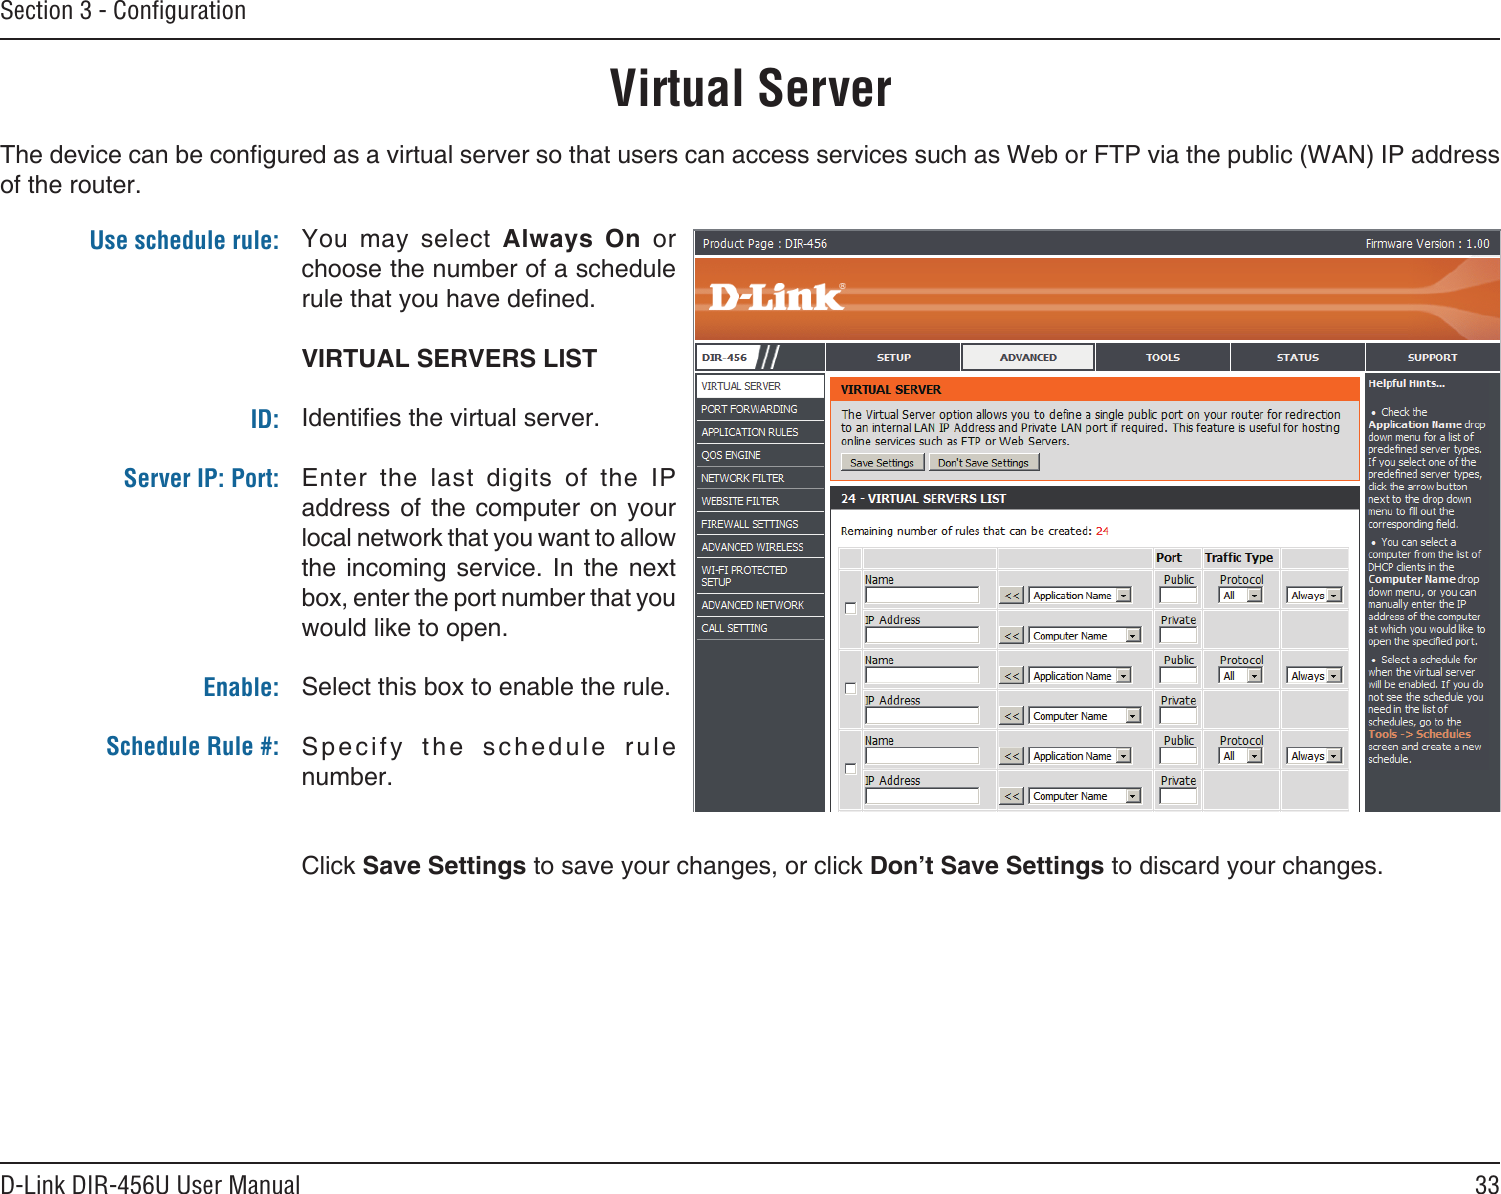 33D-Link DIR-456U User ManualSection 3 - ConﬁgurationVirtual ServerThe device can be congured as a virtual server so that users can access services such as Web or FTP via the public (WAN) IP address of the router. You  may  select  Always  On  or choose the number of a schedule rule that you have dened.VIRTUAL SERVERS LISTIdenties the virtual server.Enter  the  last  digits  of  the  IP address of  the computer on  your local network that you want to allow the  incoming service.  In  the  next box, enter the port number that you would like to open.Select this box to enable the rule.Specify  the  schedule  rule number. Click Save Settings to save your changes, or click Don’t Save Settings to discard your changes.Use schedule rule:ID:Server IP: Port: Enable:Schedule Rule #: